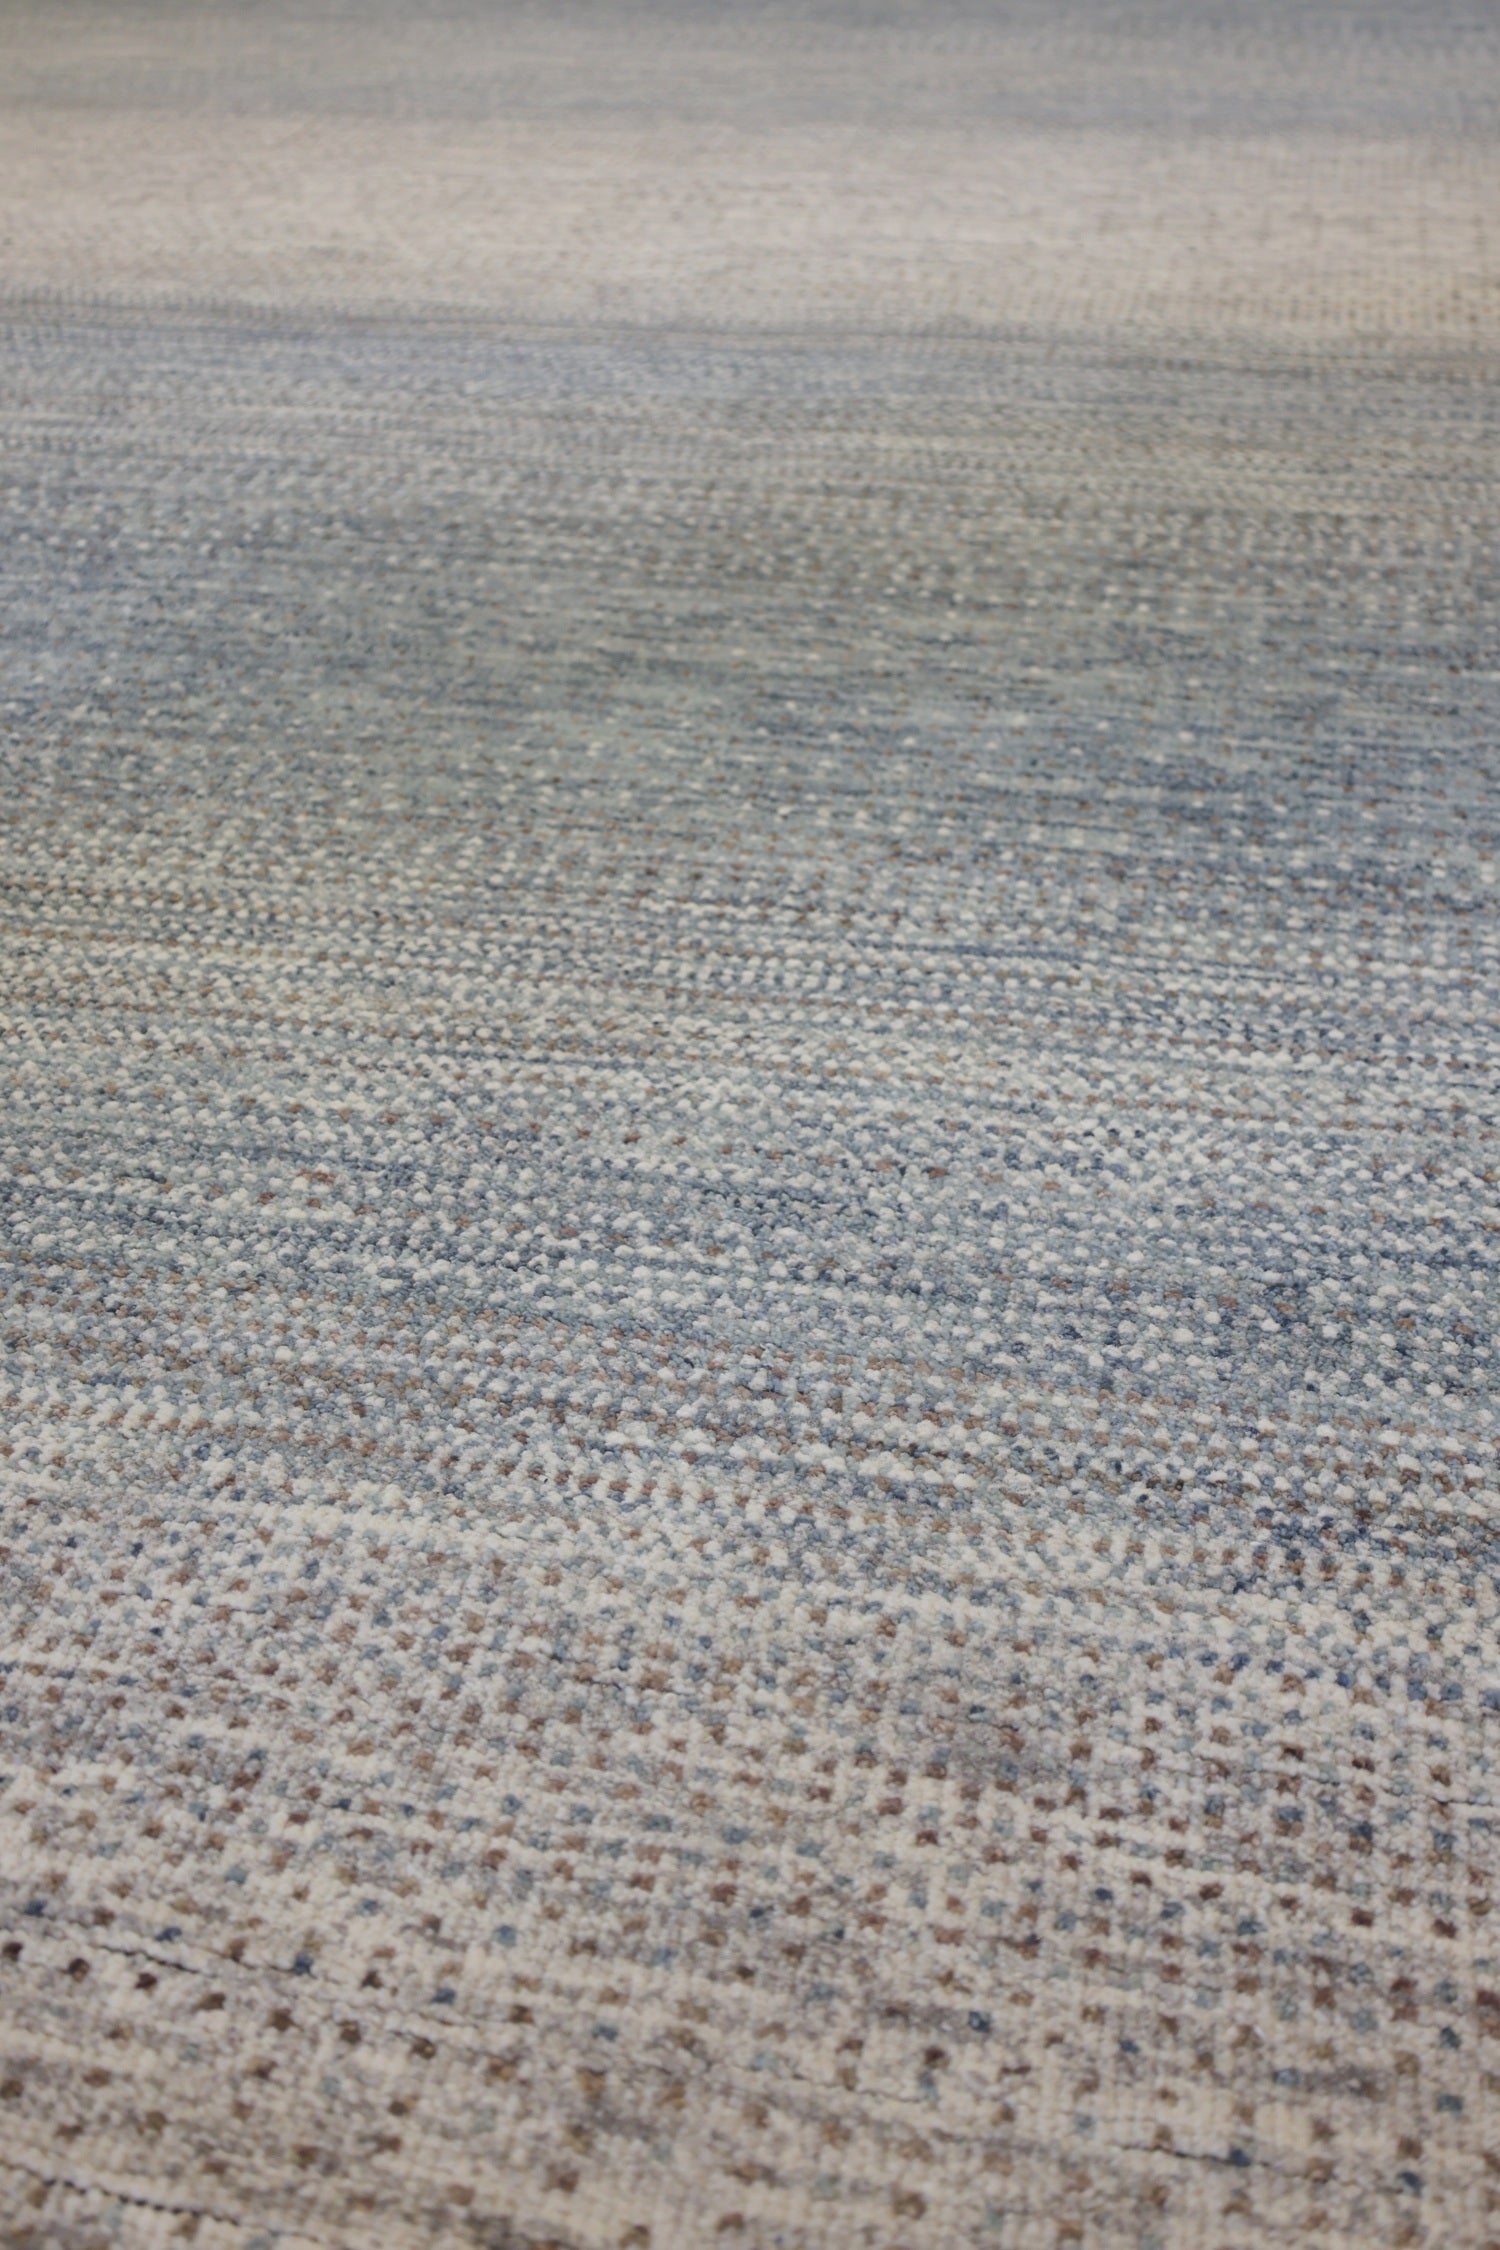 Tides Handwoven Contemporary Rug, J72483